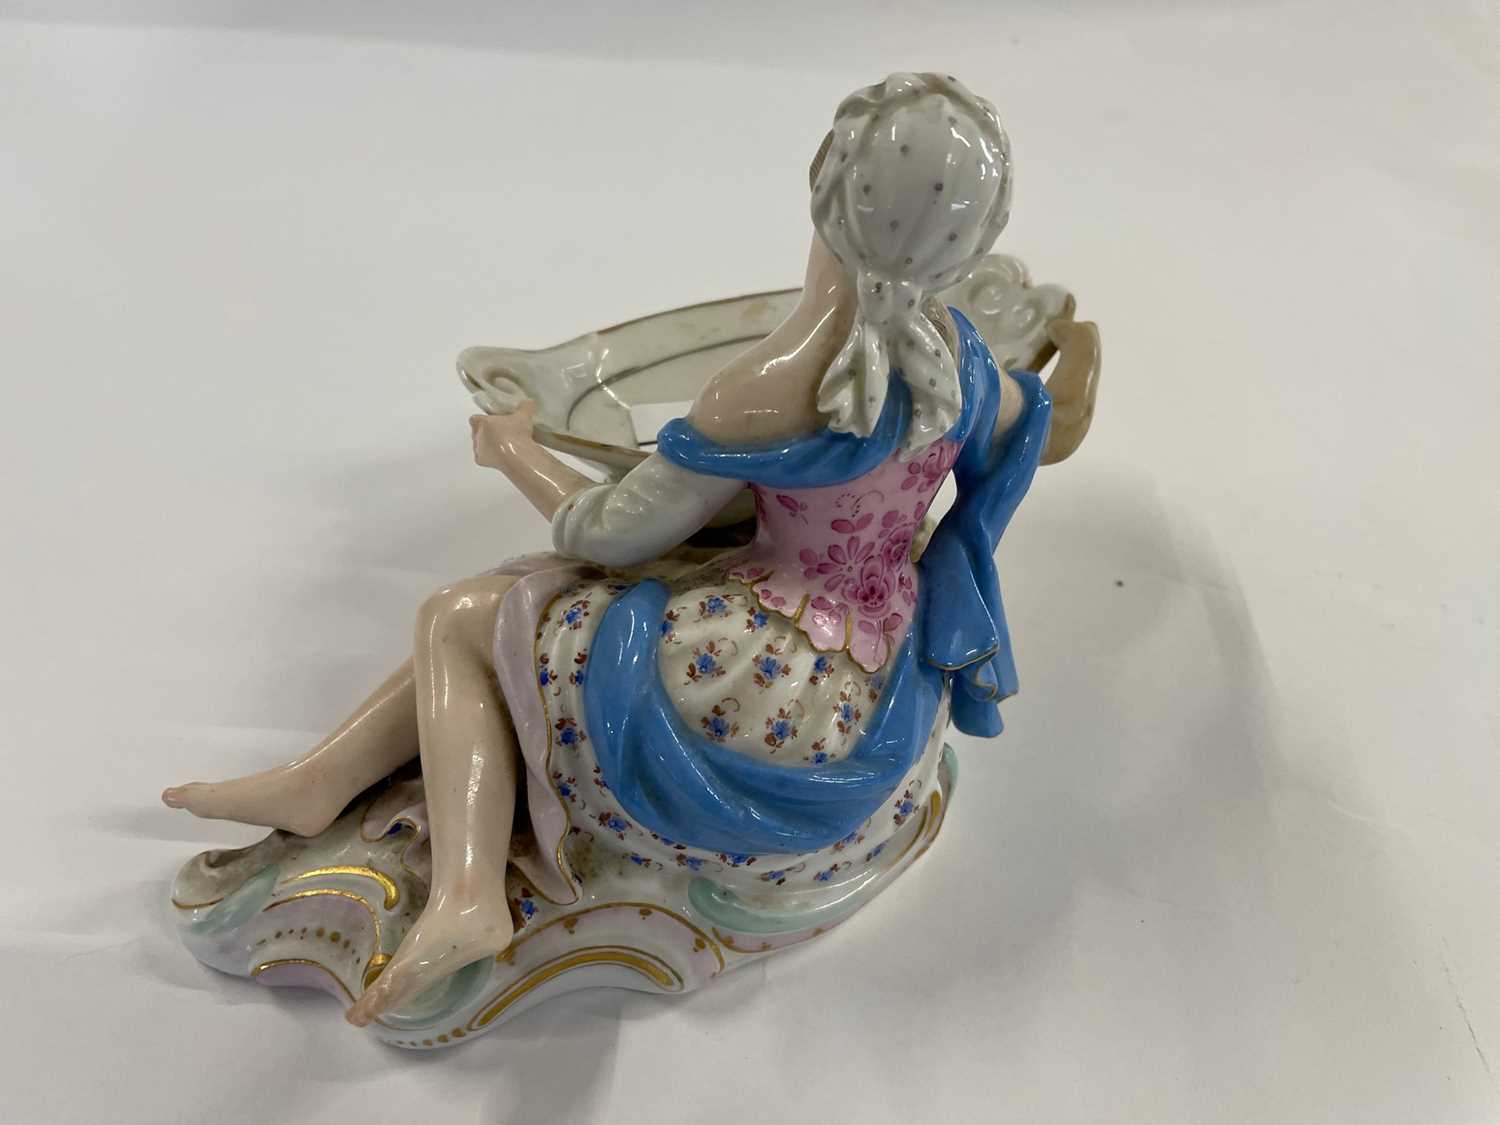 19th Century Meissen sweetmeat figure modelled as a young girl holding a tray (a/f) - Image 2 of 2